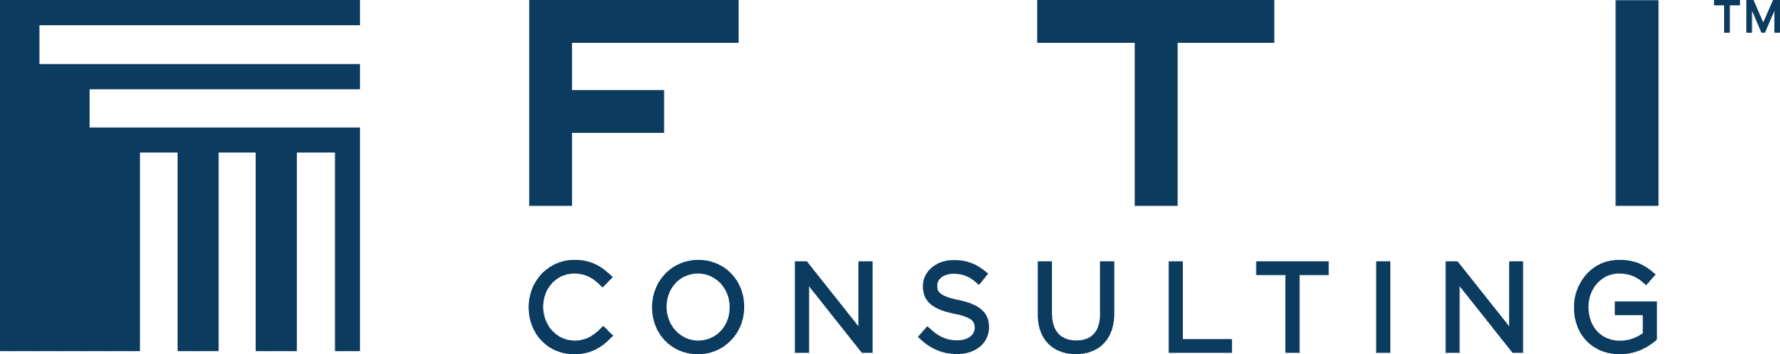 FIT_CONSULTING_LOGO